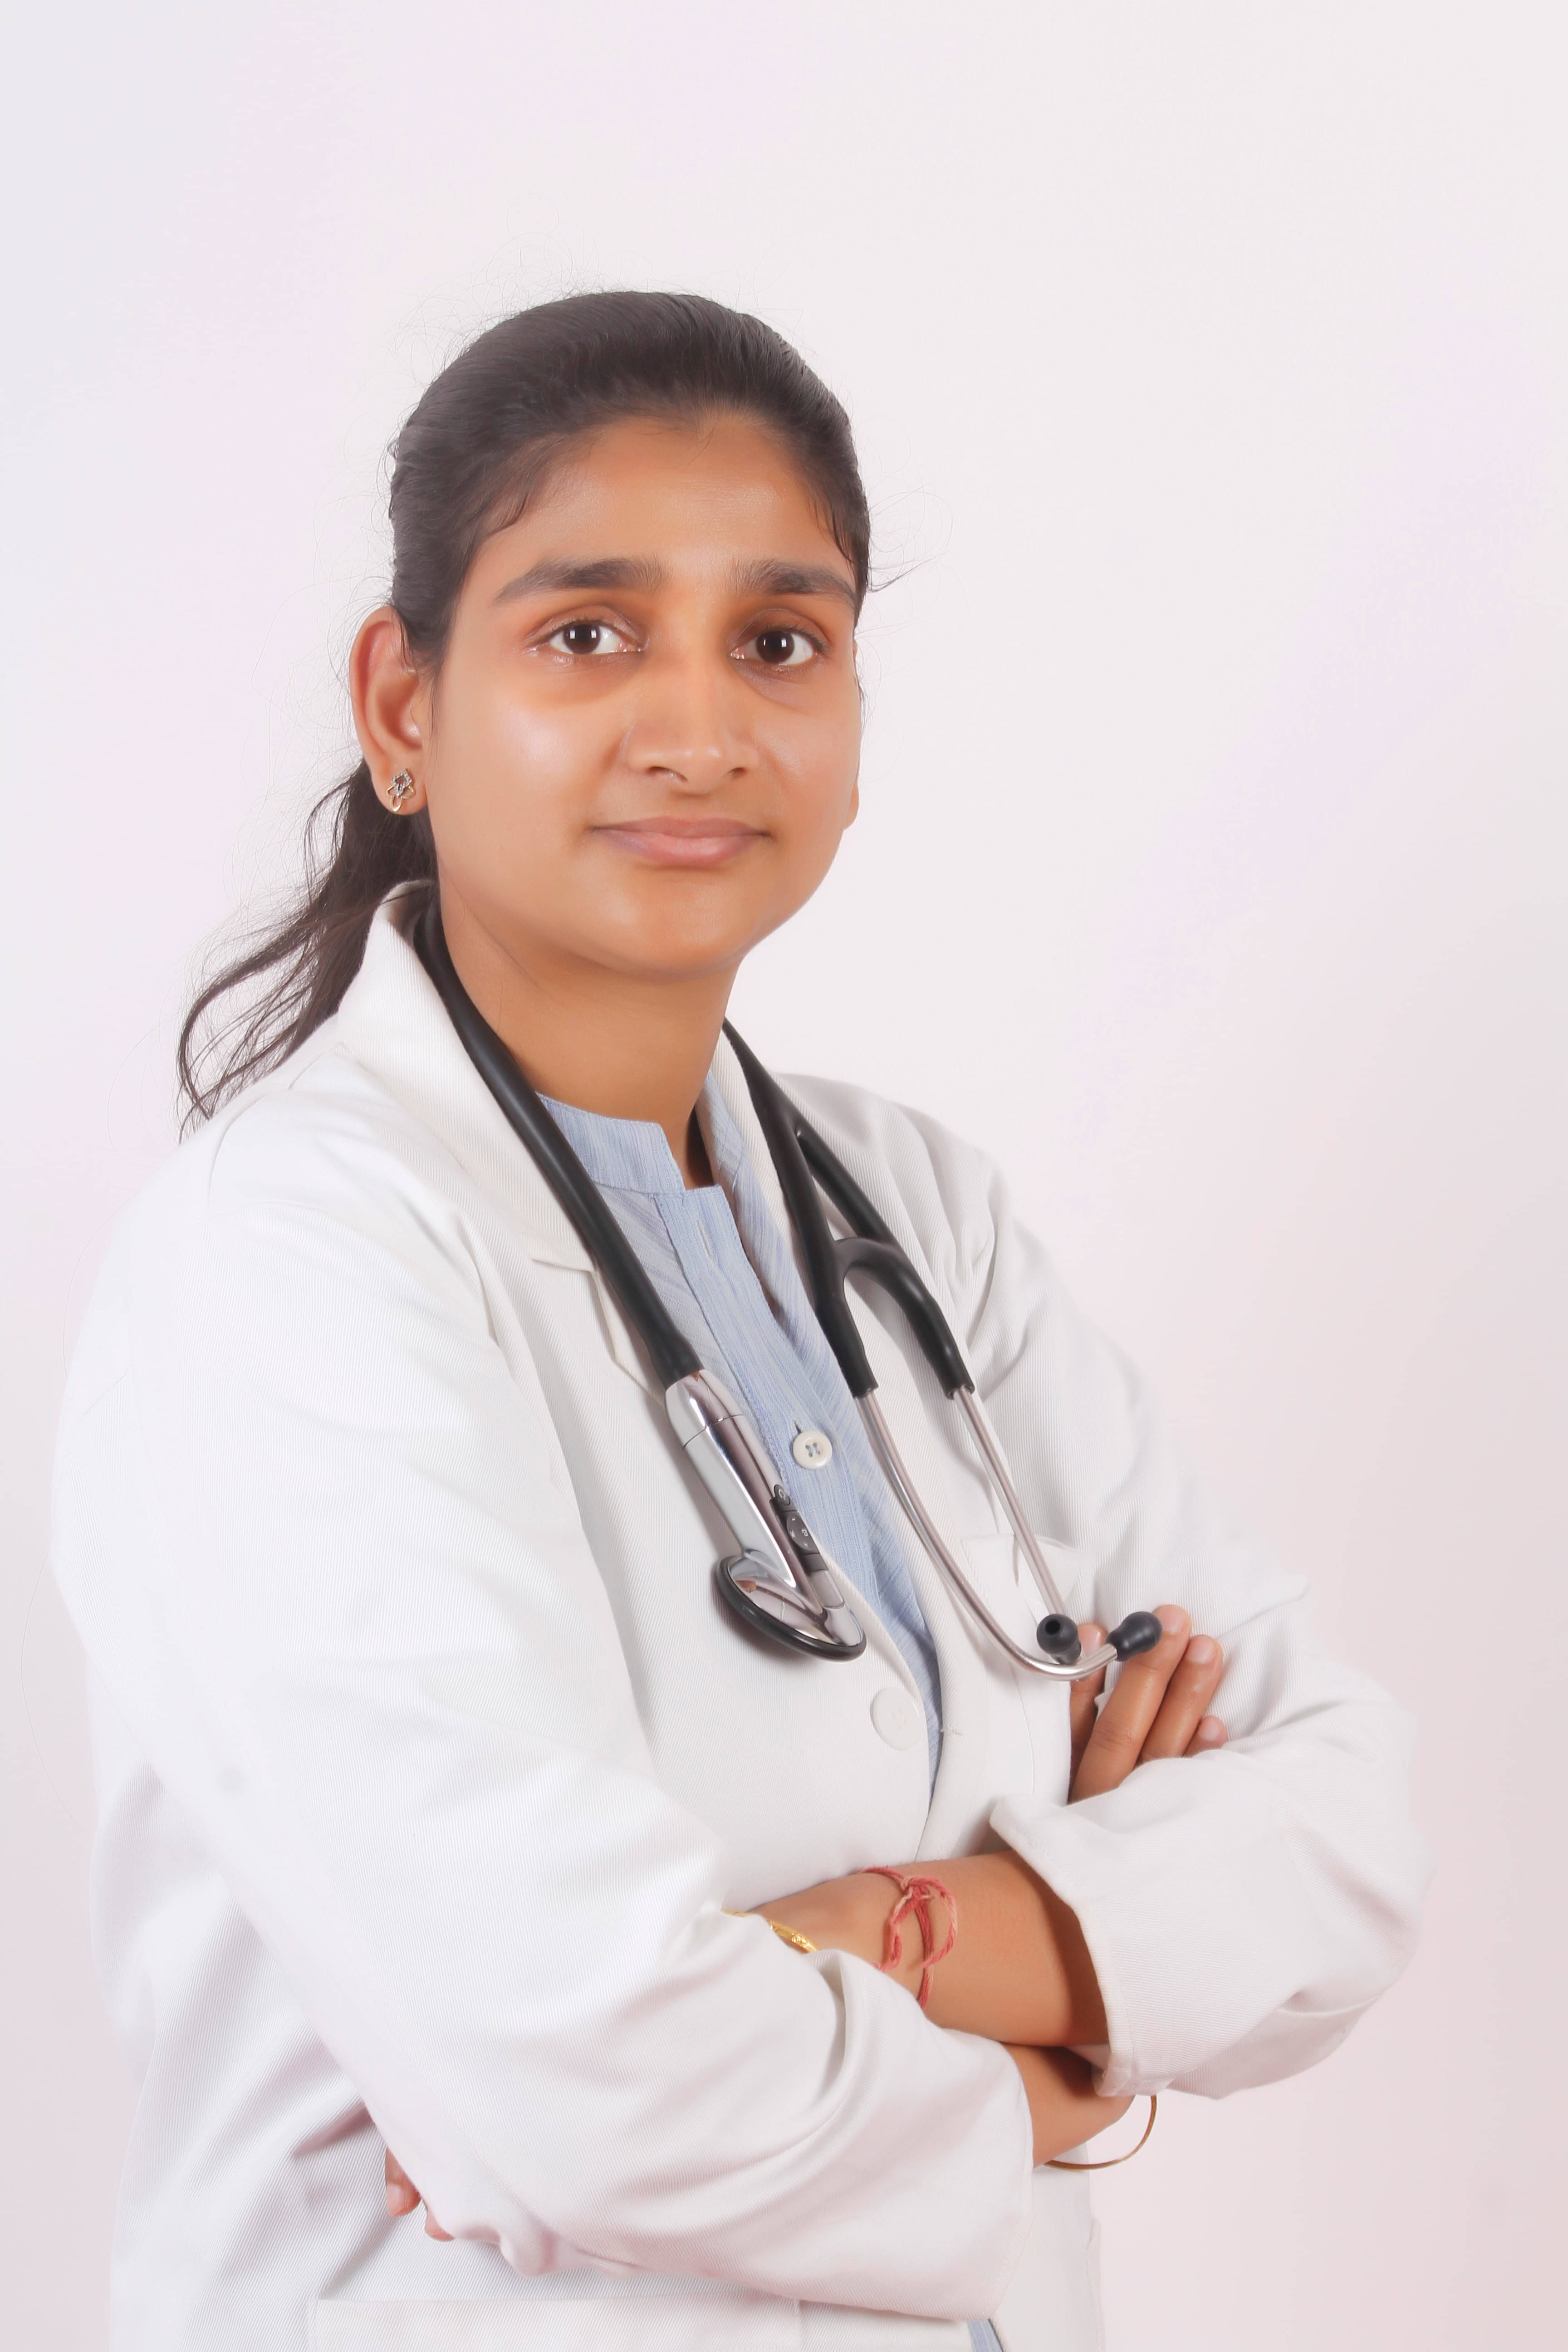 Dr. Neha Jain - Book Appointment, Consult Online, View Fees, Contact  Number, Feedbacks | General Physician in Gurgaon